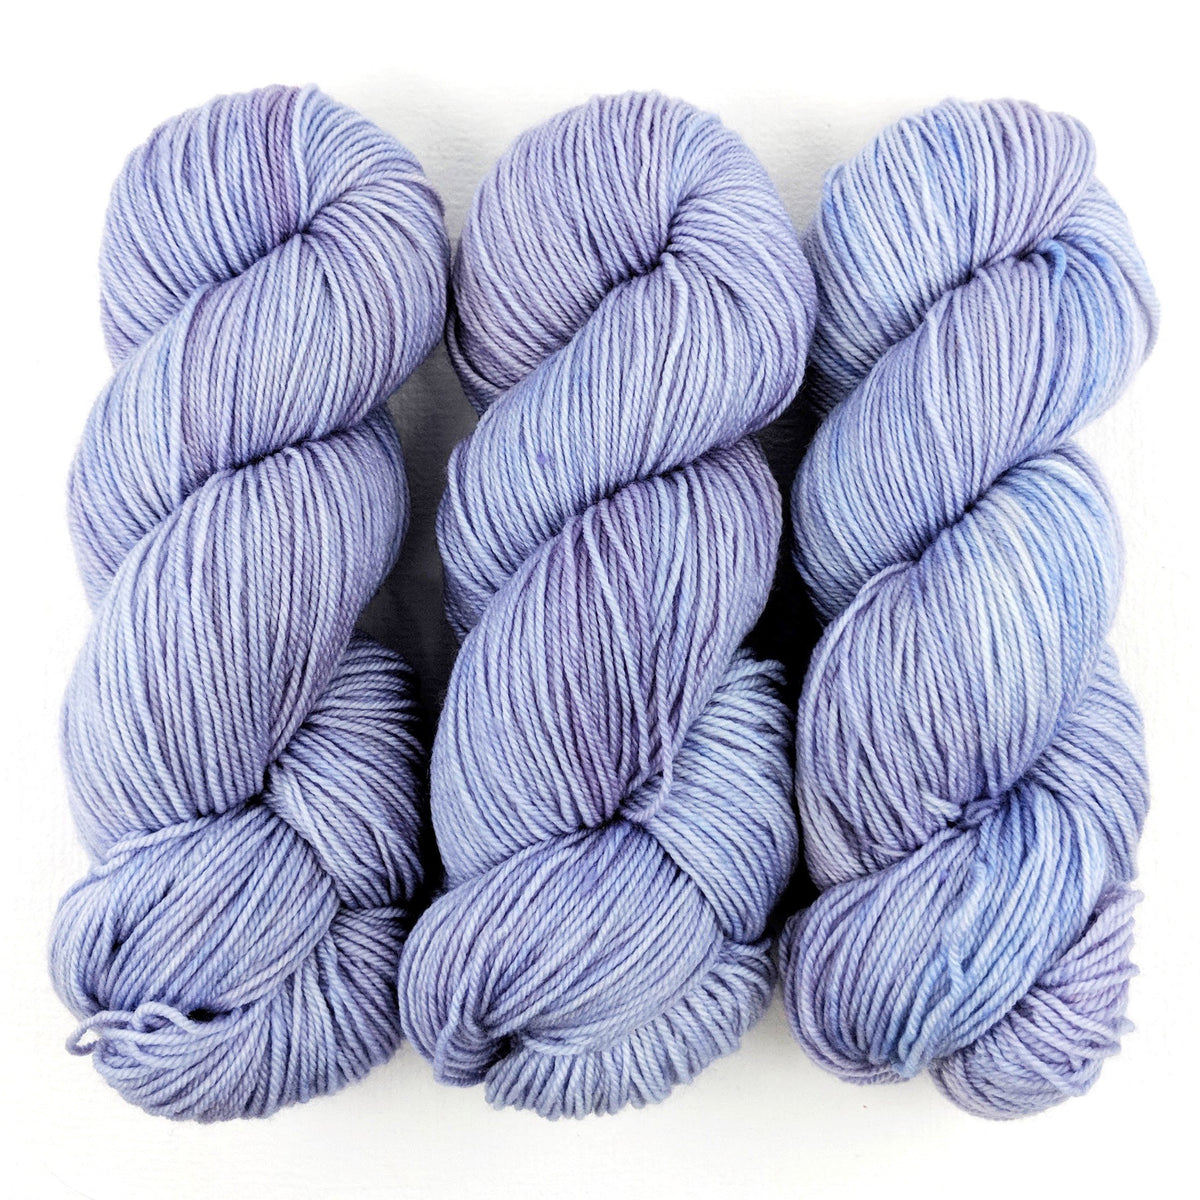 Lavender Cupcake - Passion 8 Fingering - Dyed Stock